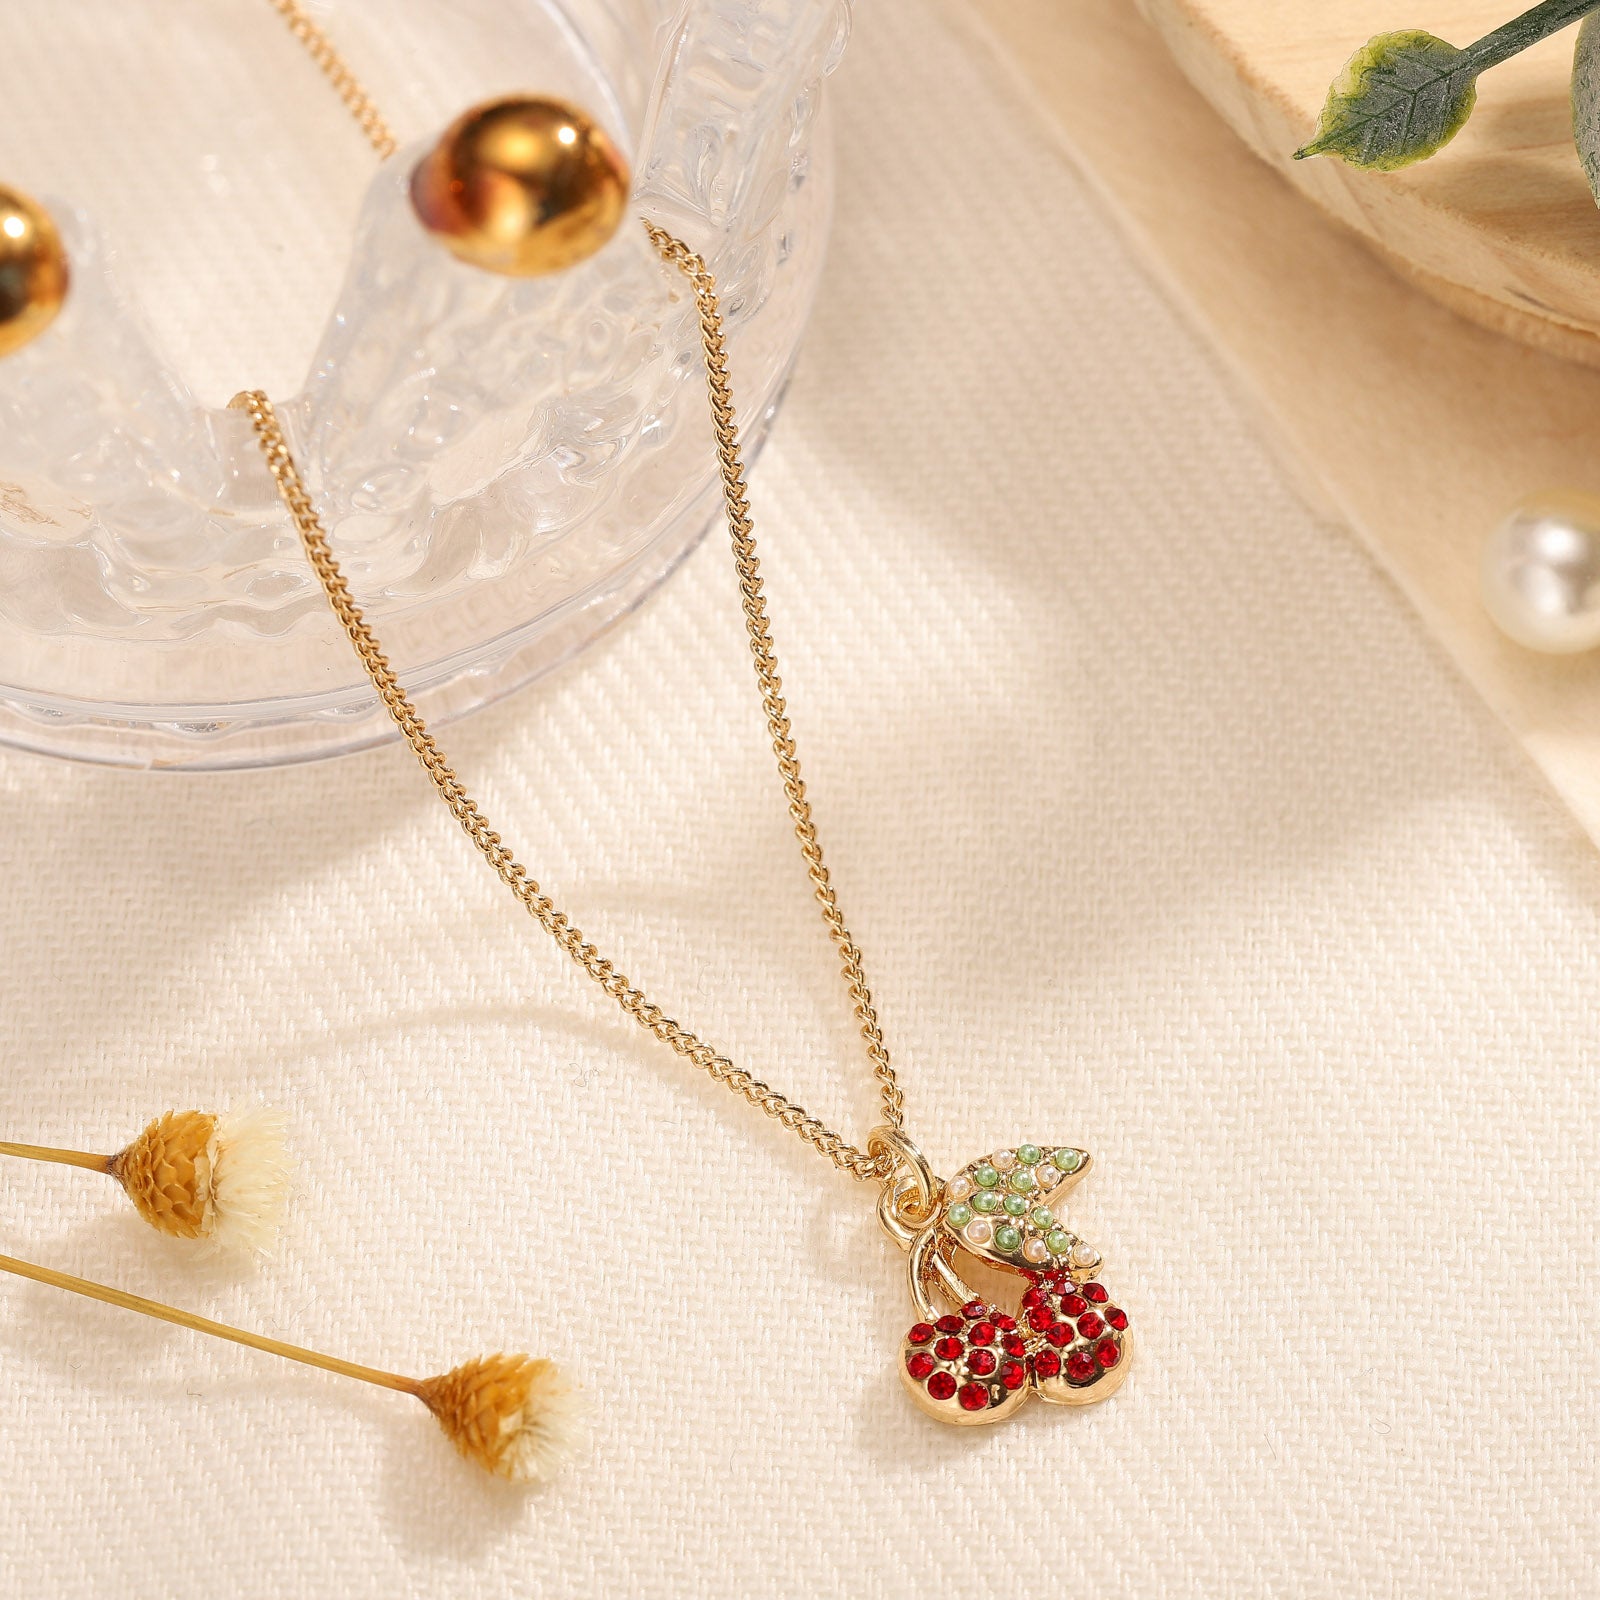 Summer Cute Cherry Necklace